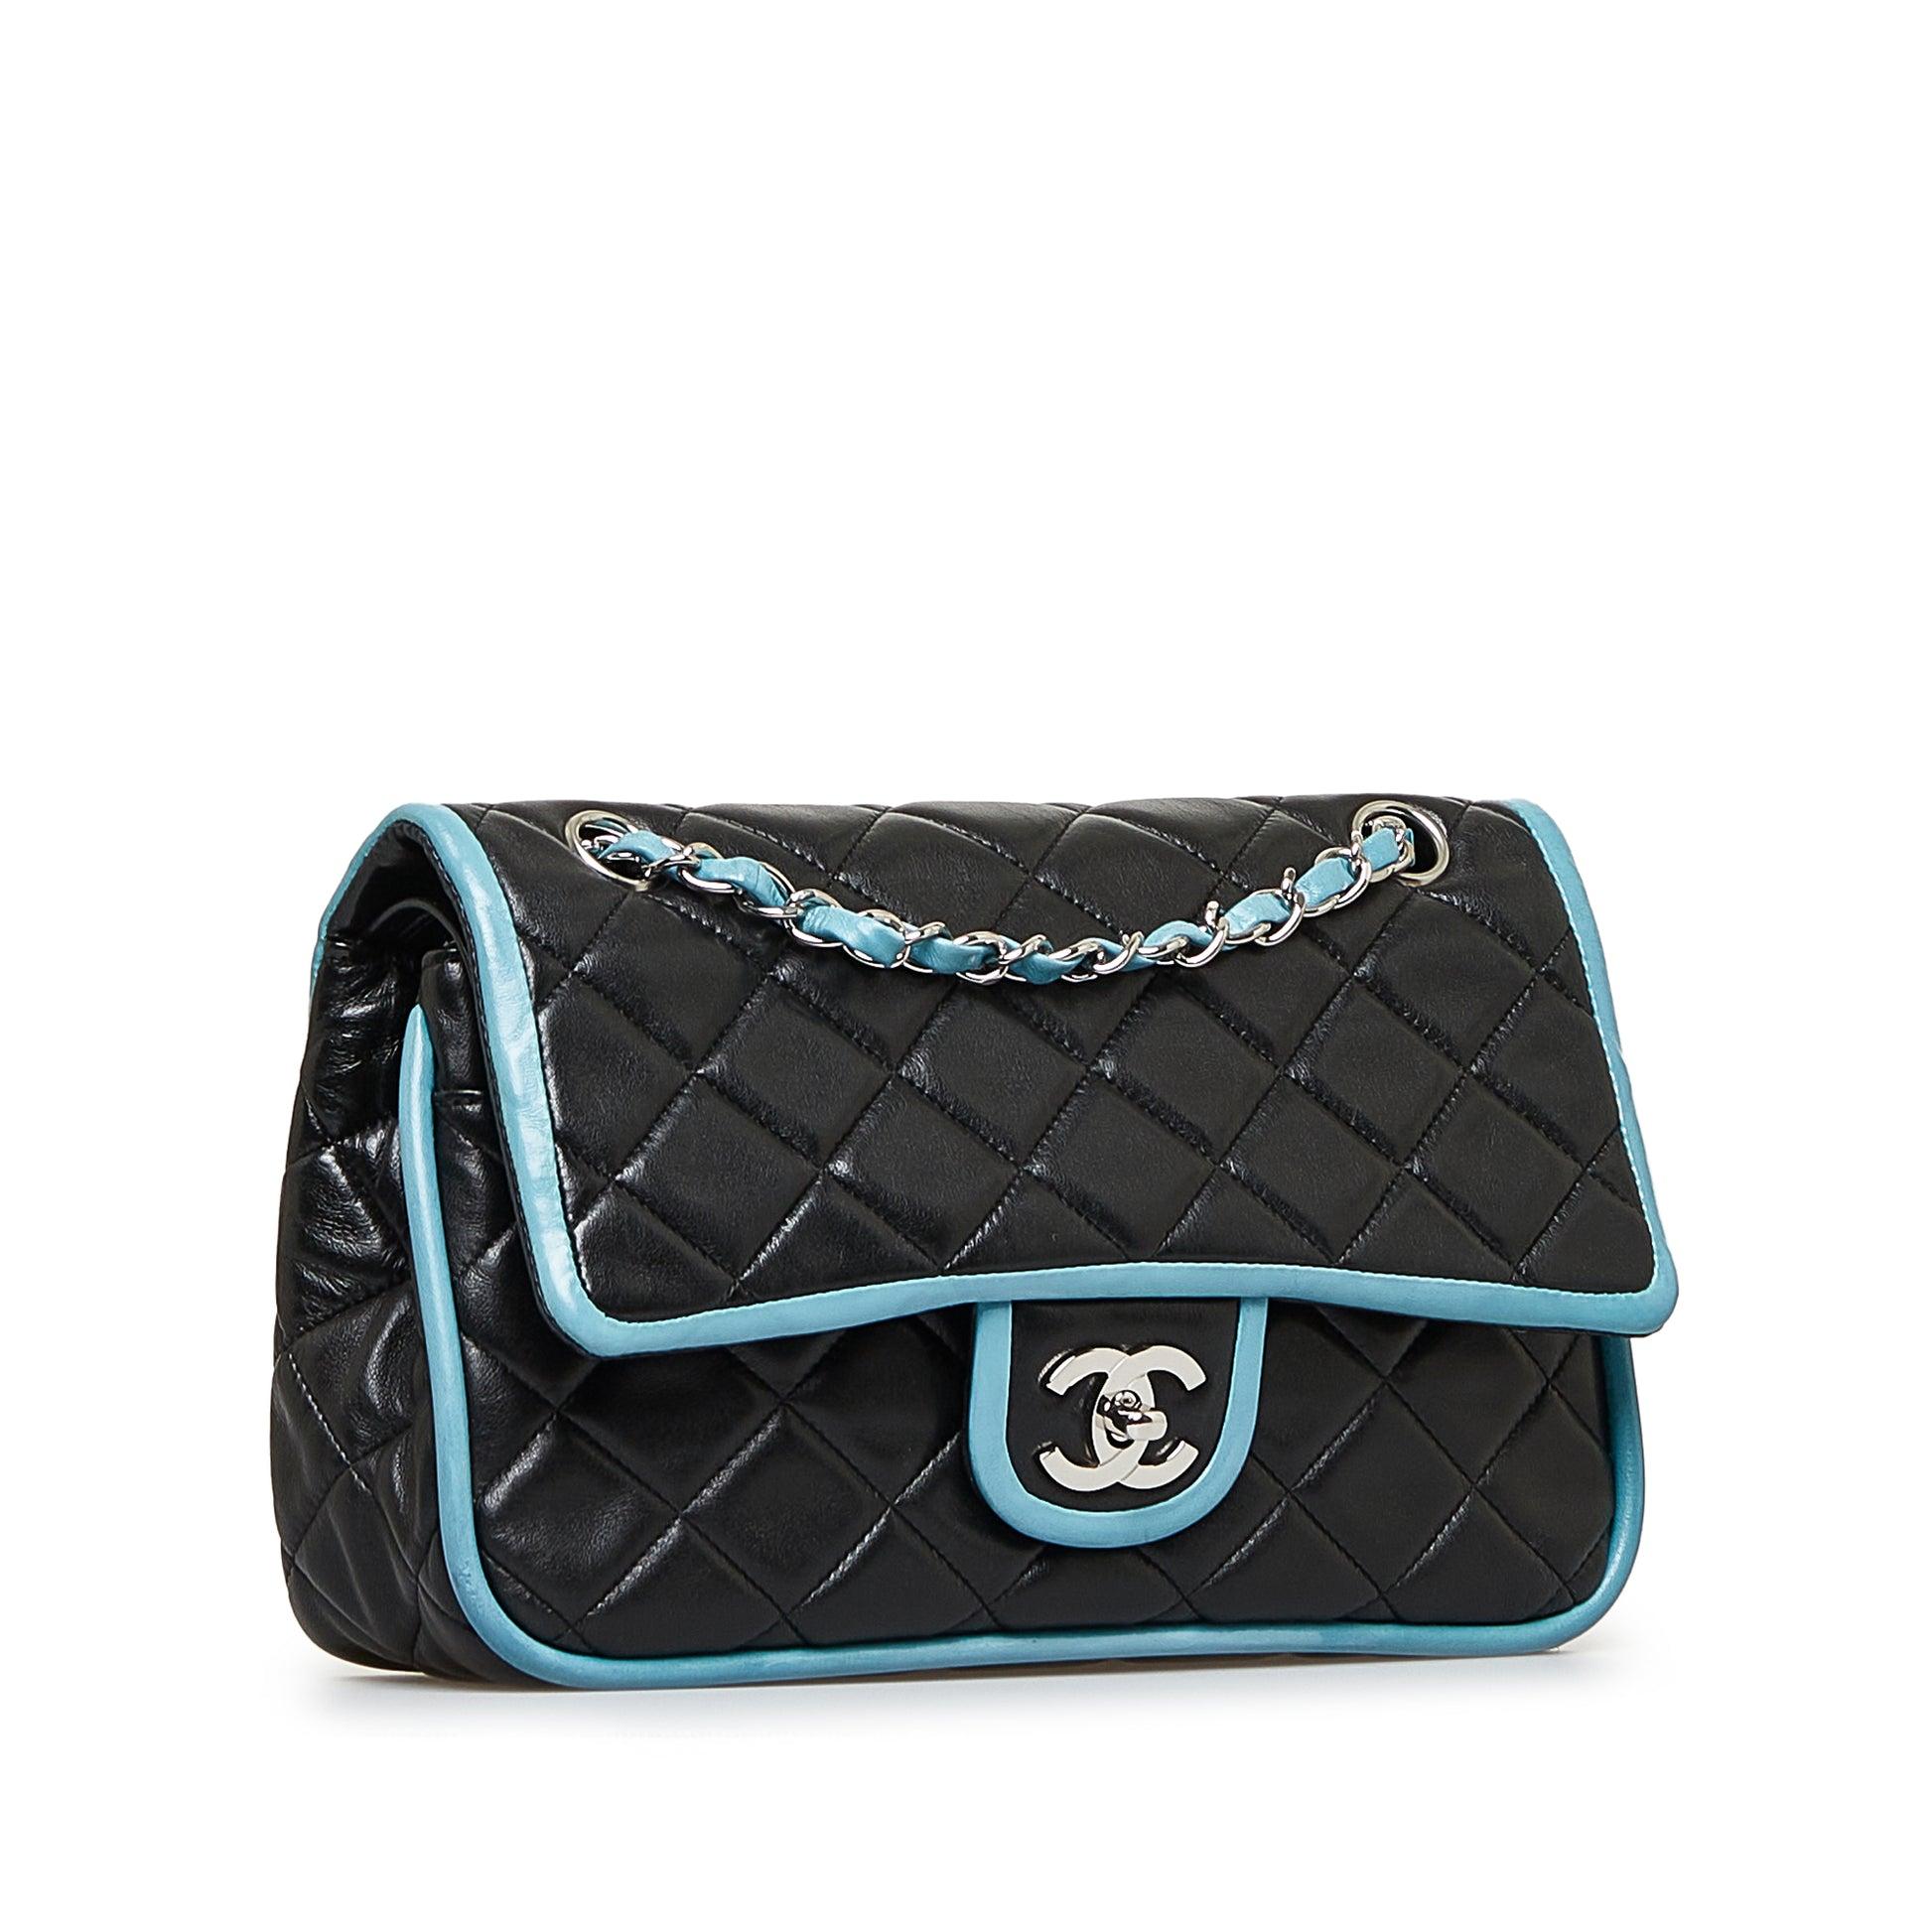 Chanel 2006 Medium Double Classic Flap in Black Lambskin Turquoise Piping Bag 4